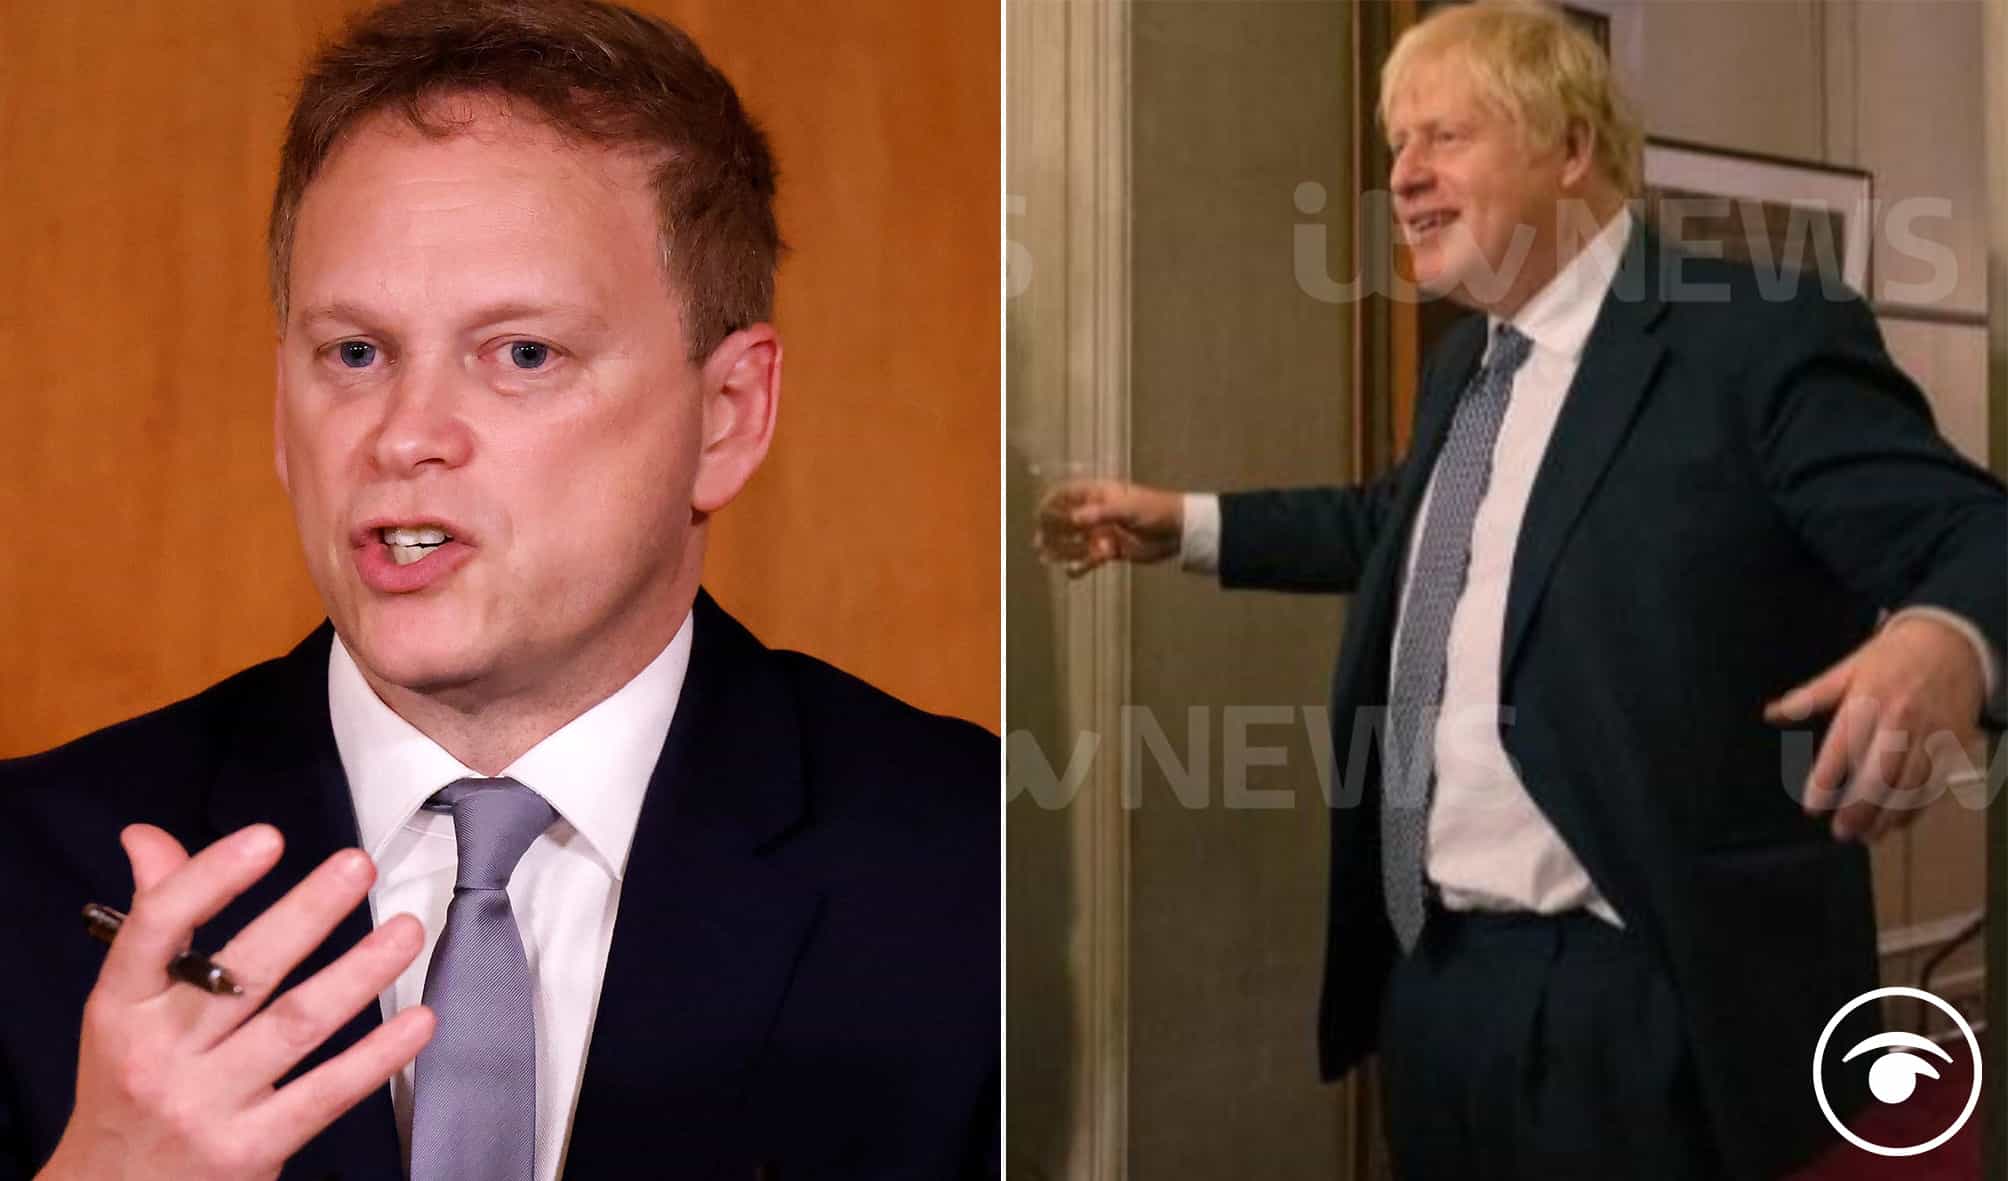 Viral vid slams Shapps’ defence of PM: ‘The Ministerial code is clear HE MUST RESIGN’